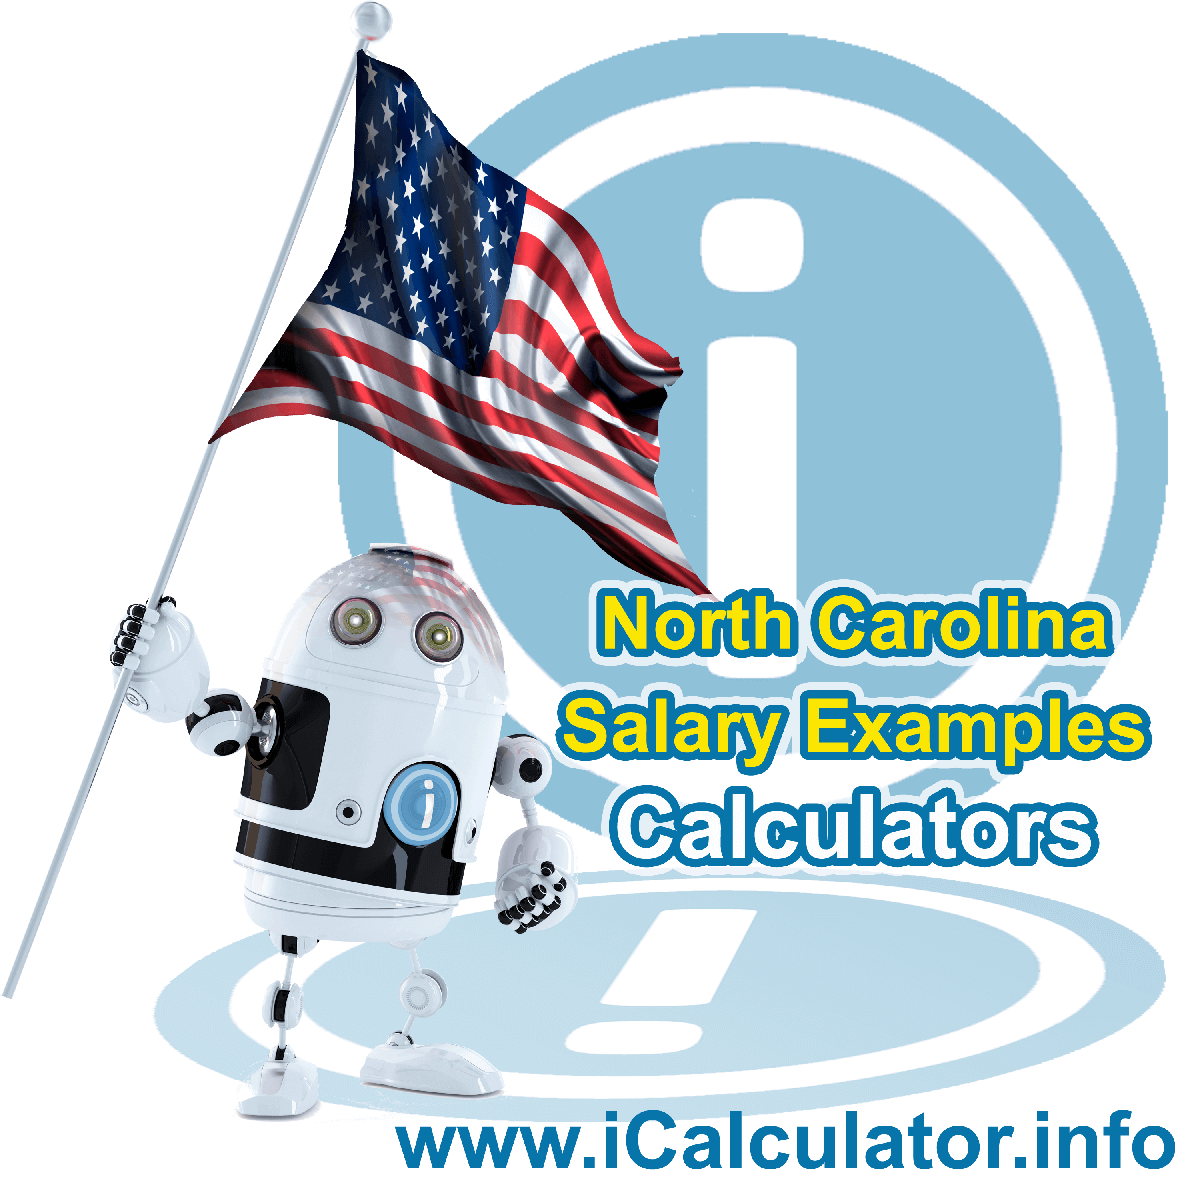 North Carolina Salary Example for $ 5,000.00 in 2023 | iCalculator™ | $ 5,000.00 salary example for employee and employer paying North Carolina State tincome taxes. Detailed salary after tax calculation including North Carolina State Tax, Federal State Tax, Medicare Deductions, Social Security, Capital Gains and other income tax and salary deductions complete with supporting North Carolina state tax tables 